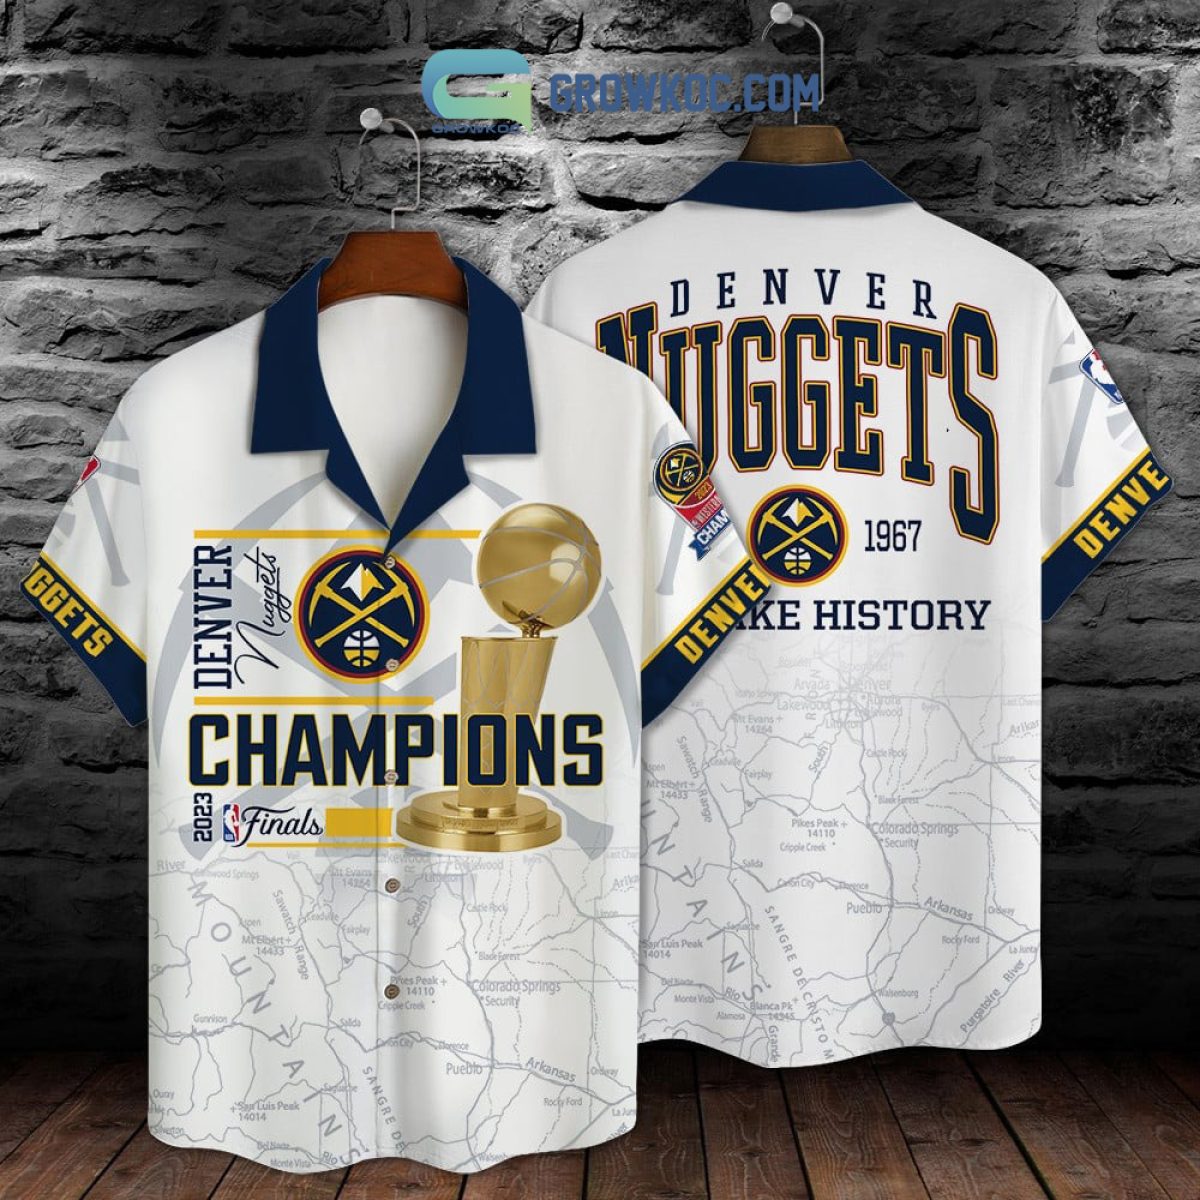 Ranking the Best Jersey Designs in Denver Nuggets History